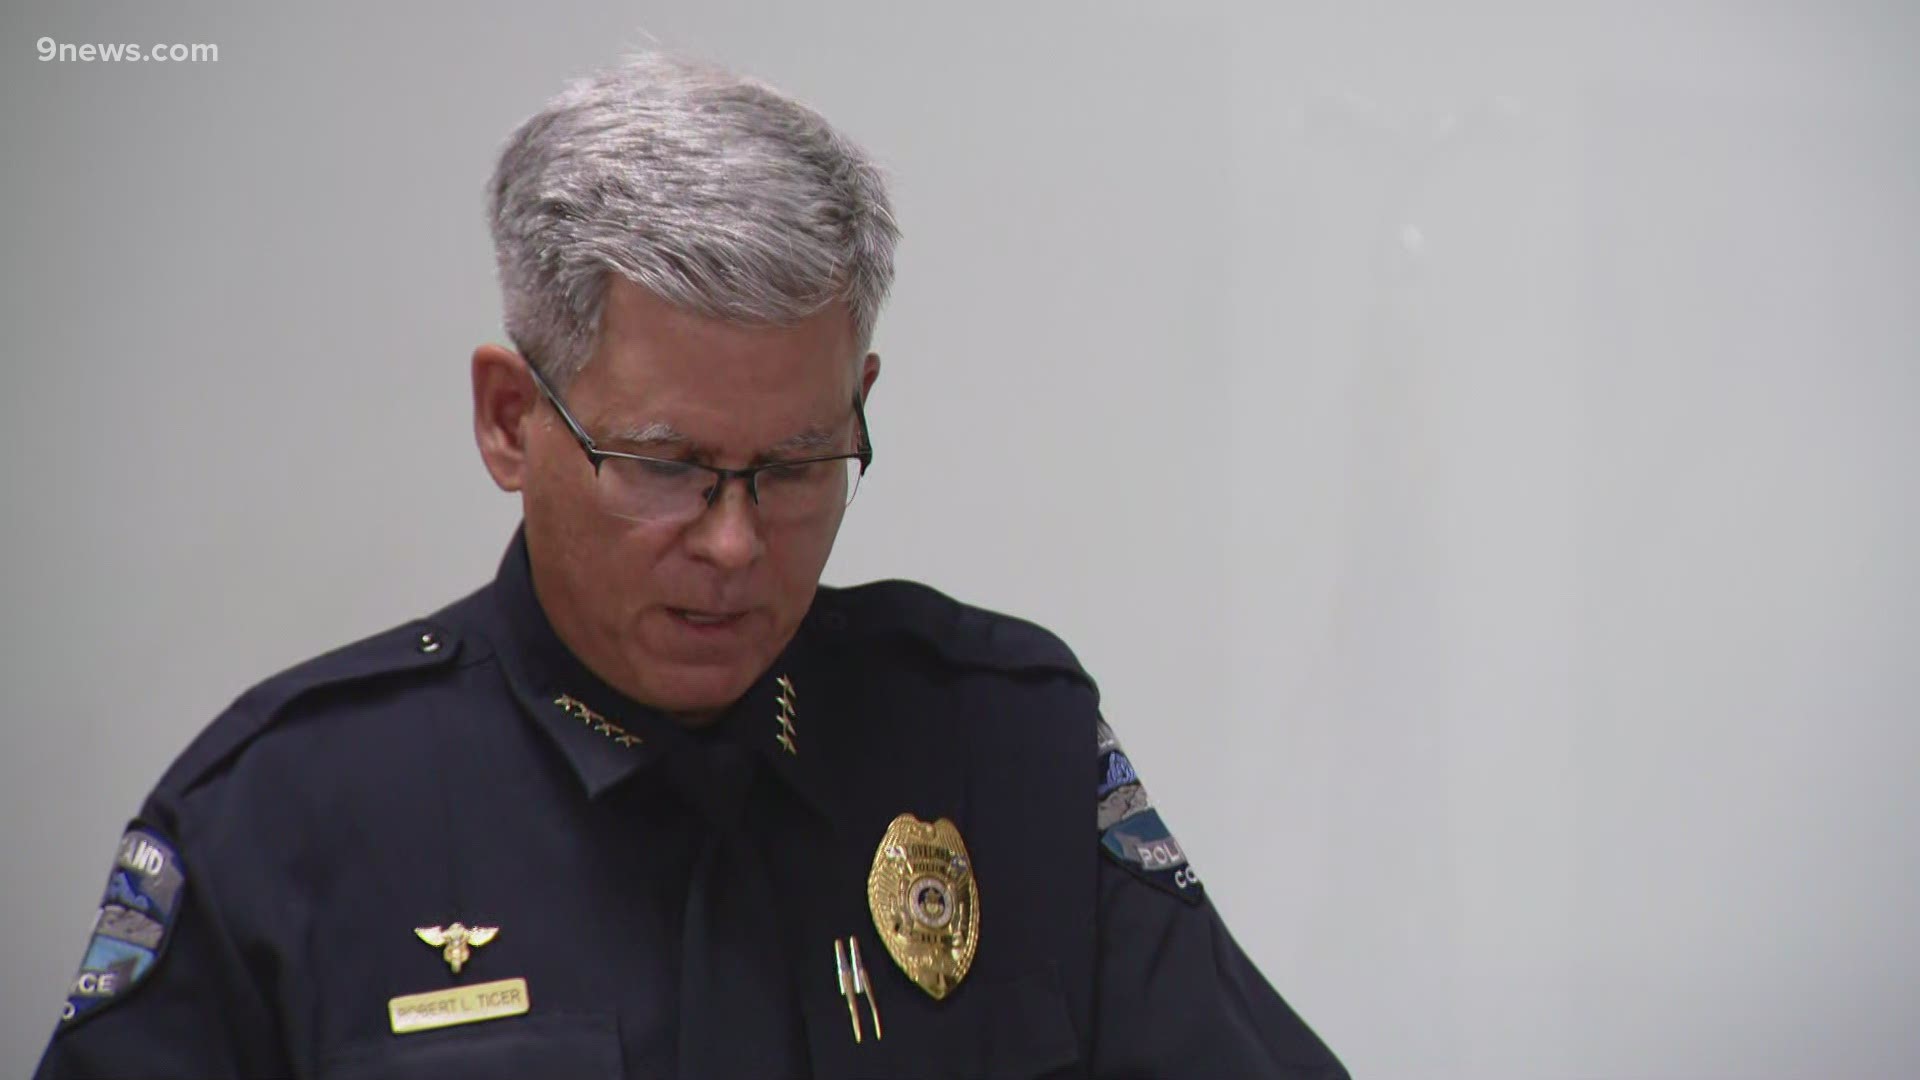 Loveland Police Chief Robert Ticer said two police officers and a community service officer are no longer with the department.